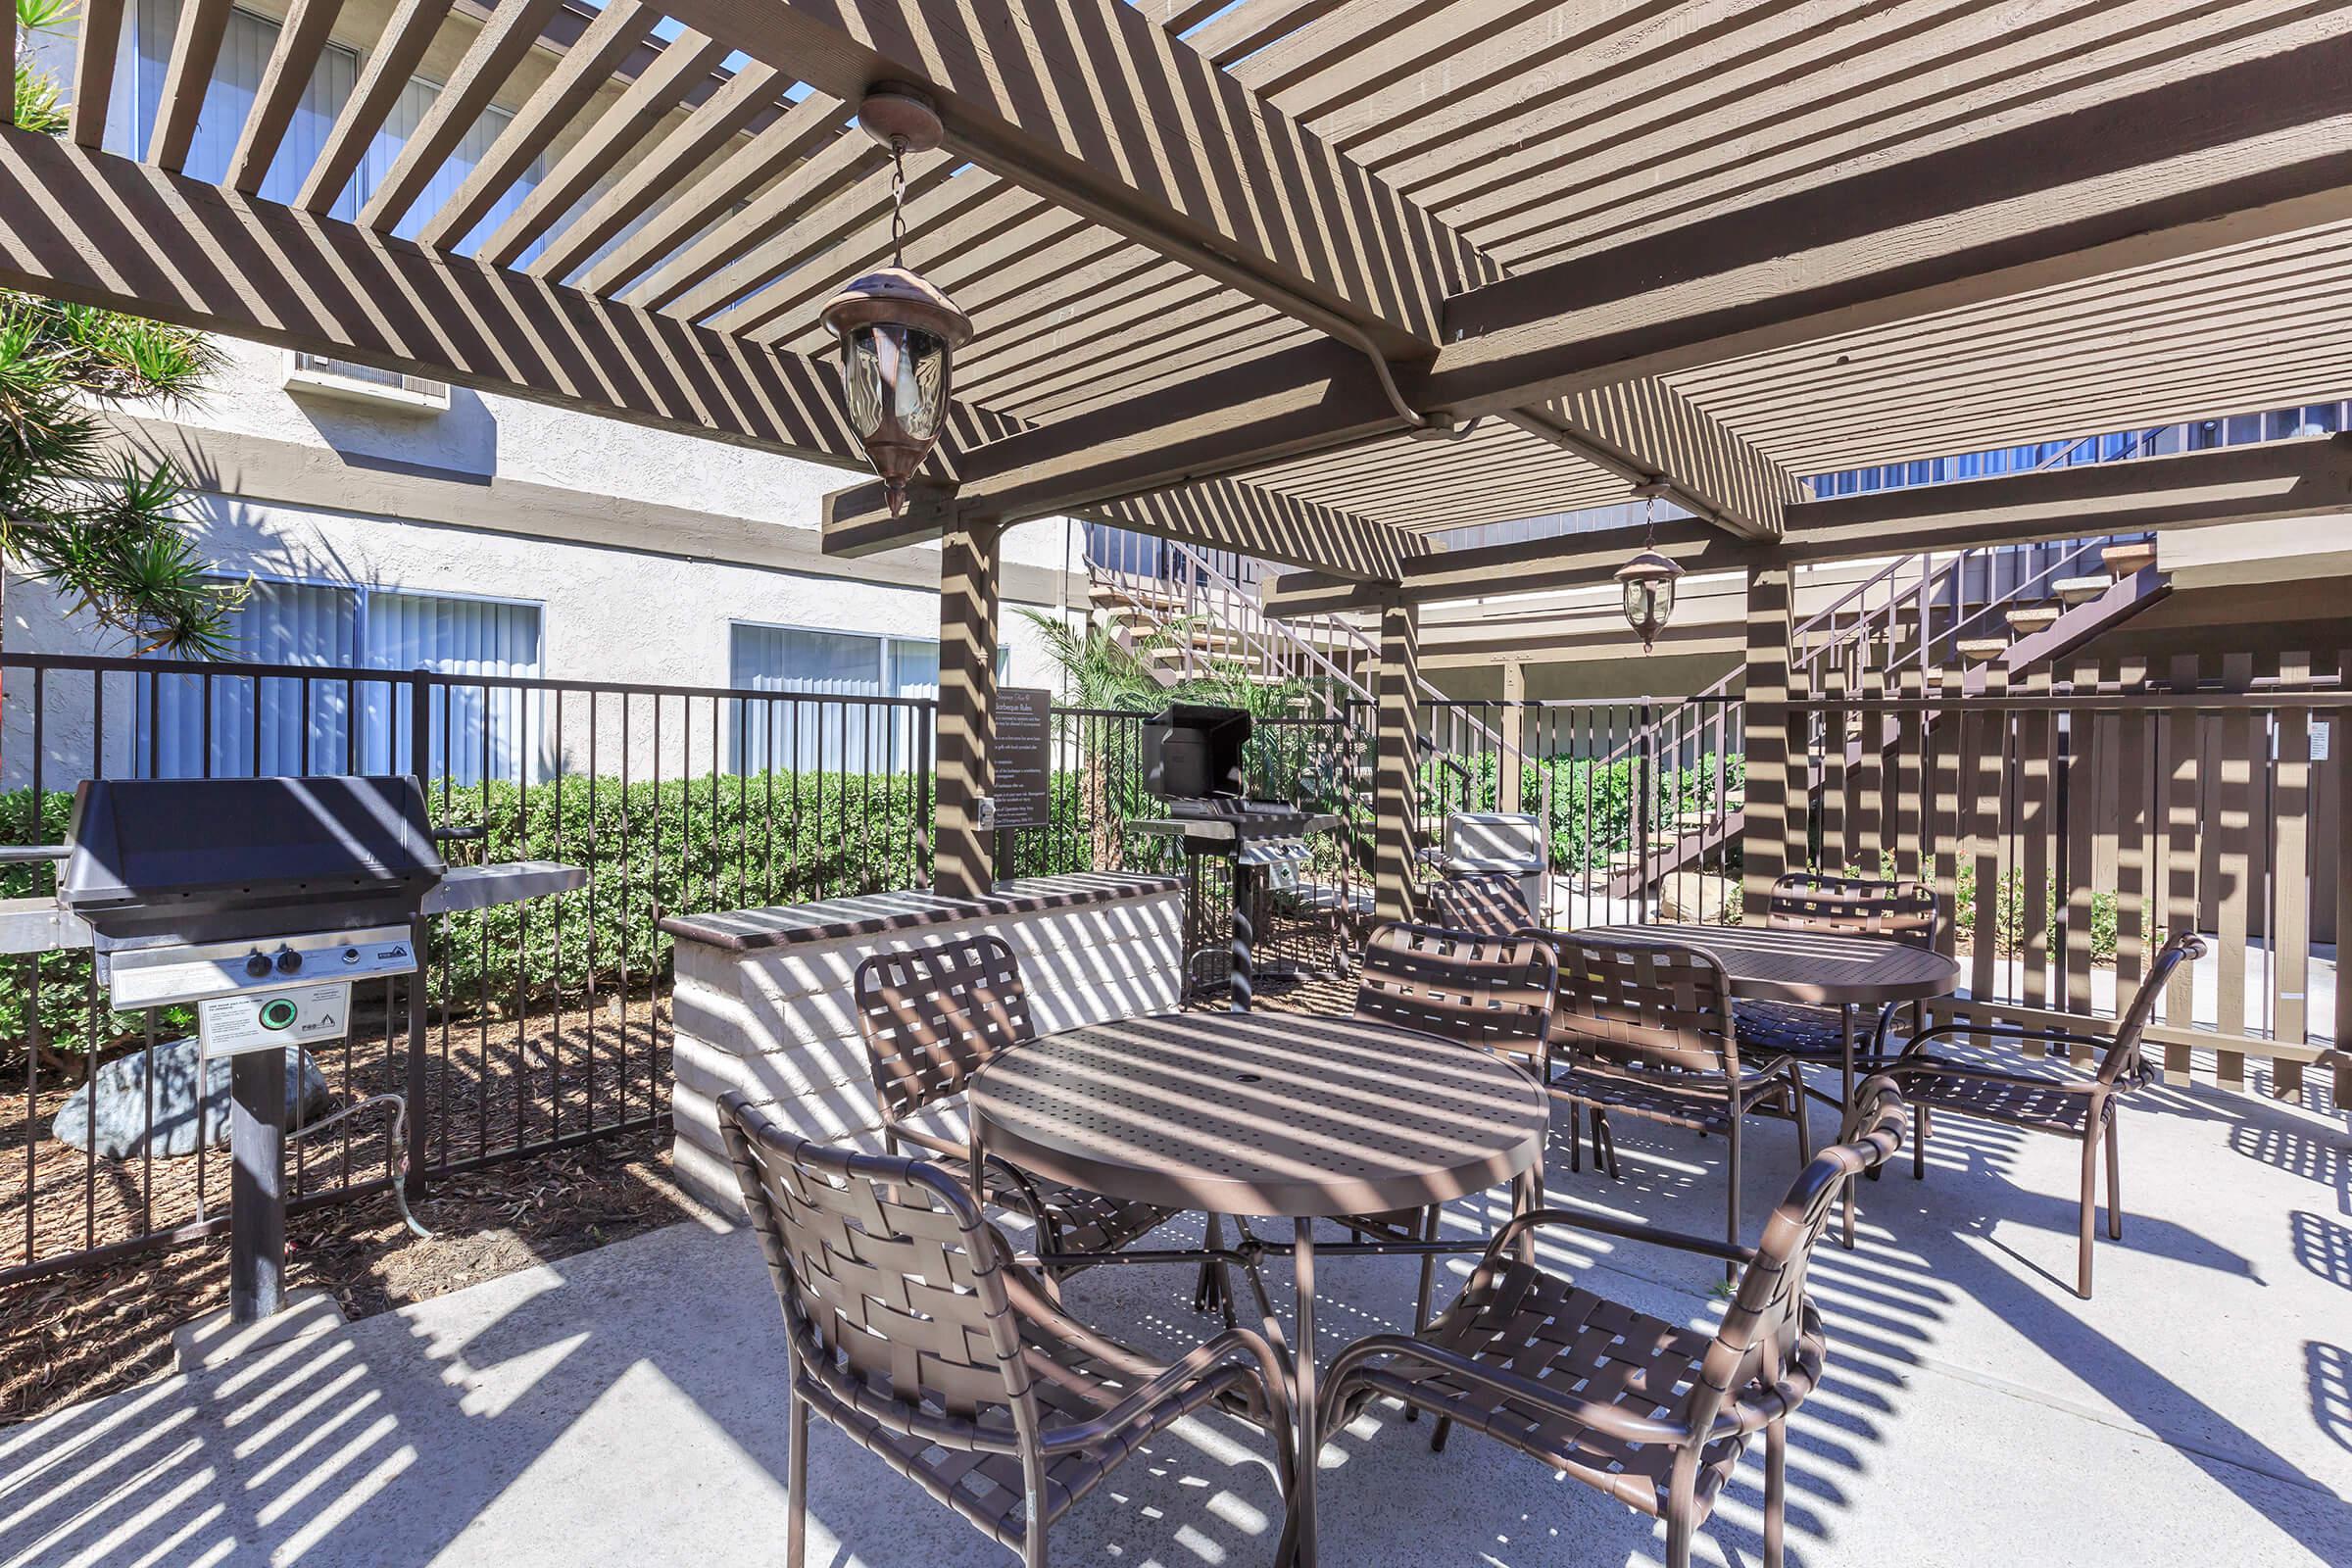 Barbecues with tables and chairs under a pergola